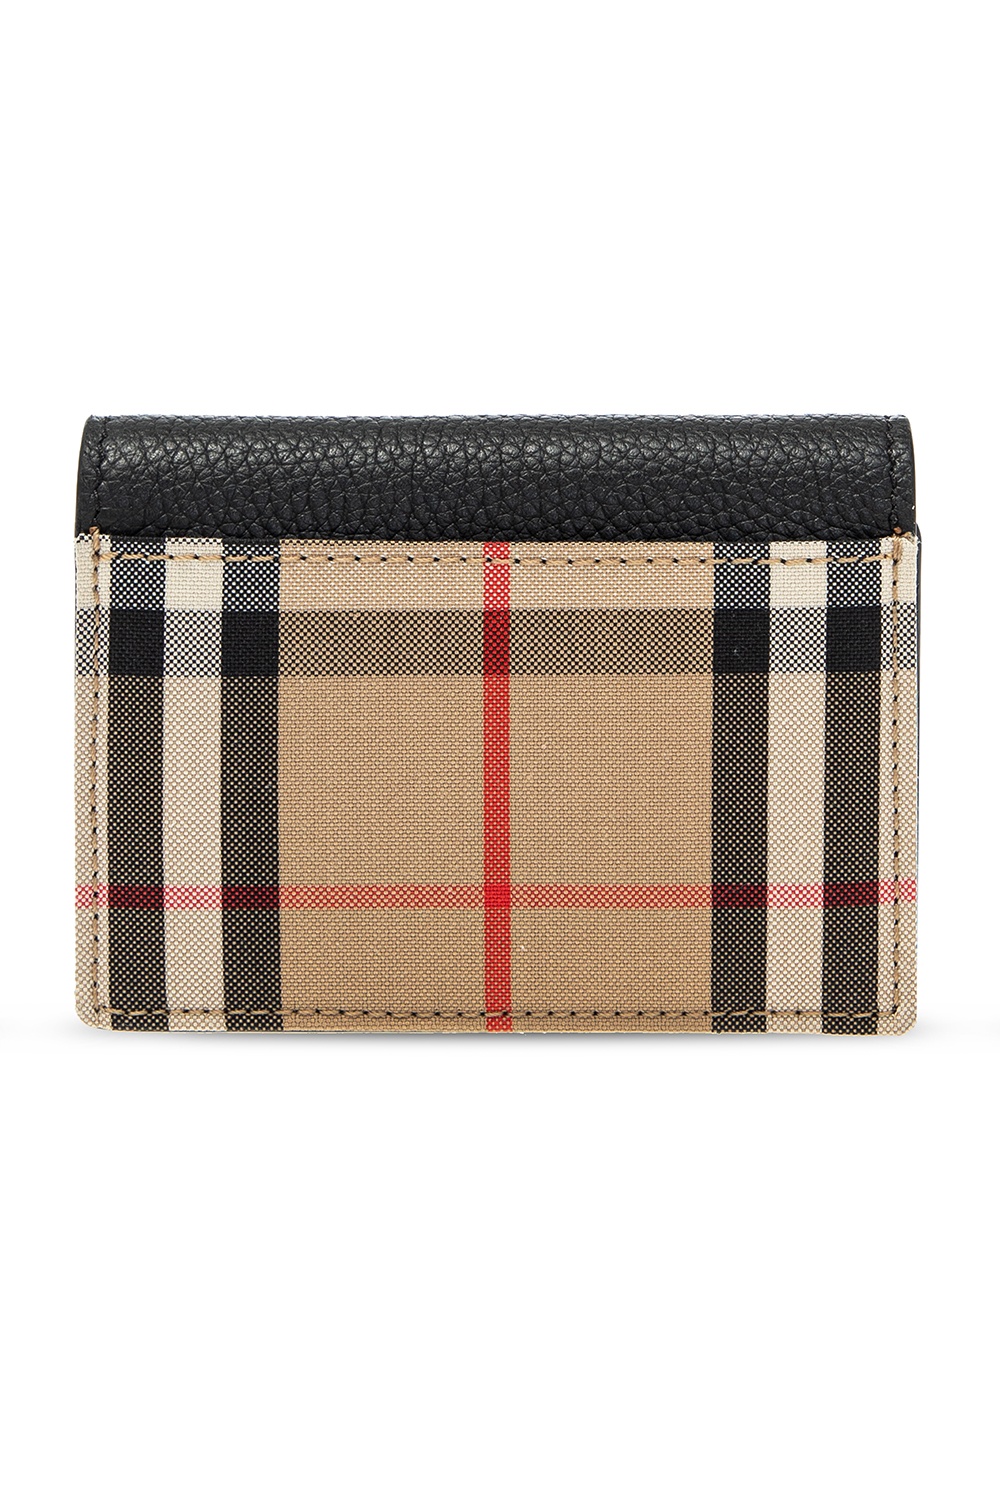 Burberry Check Motif Cardholder in Brown